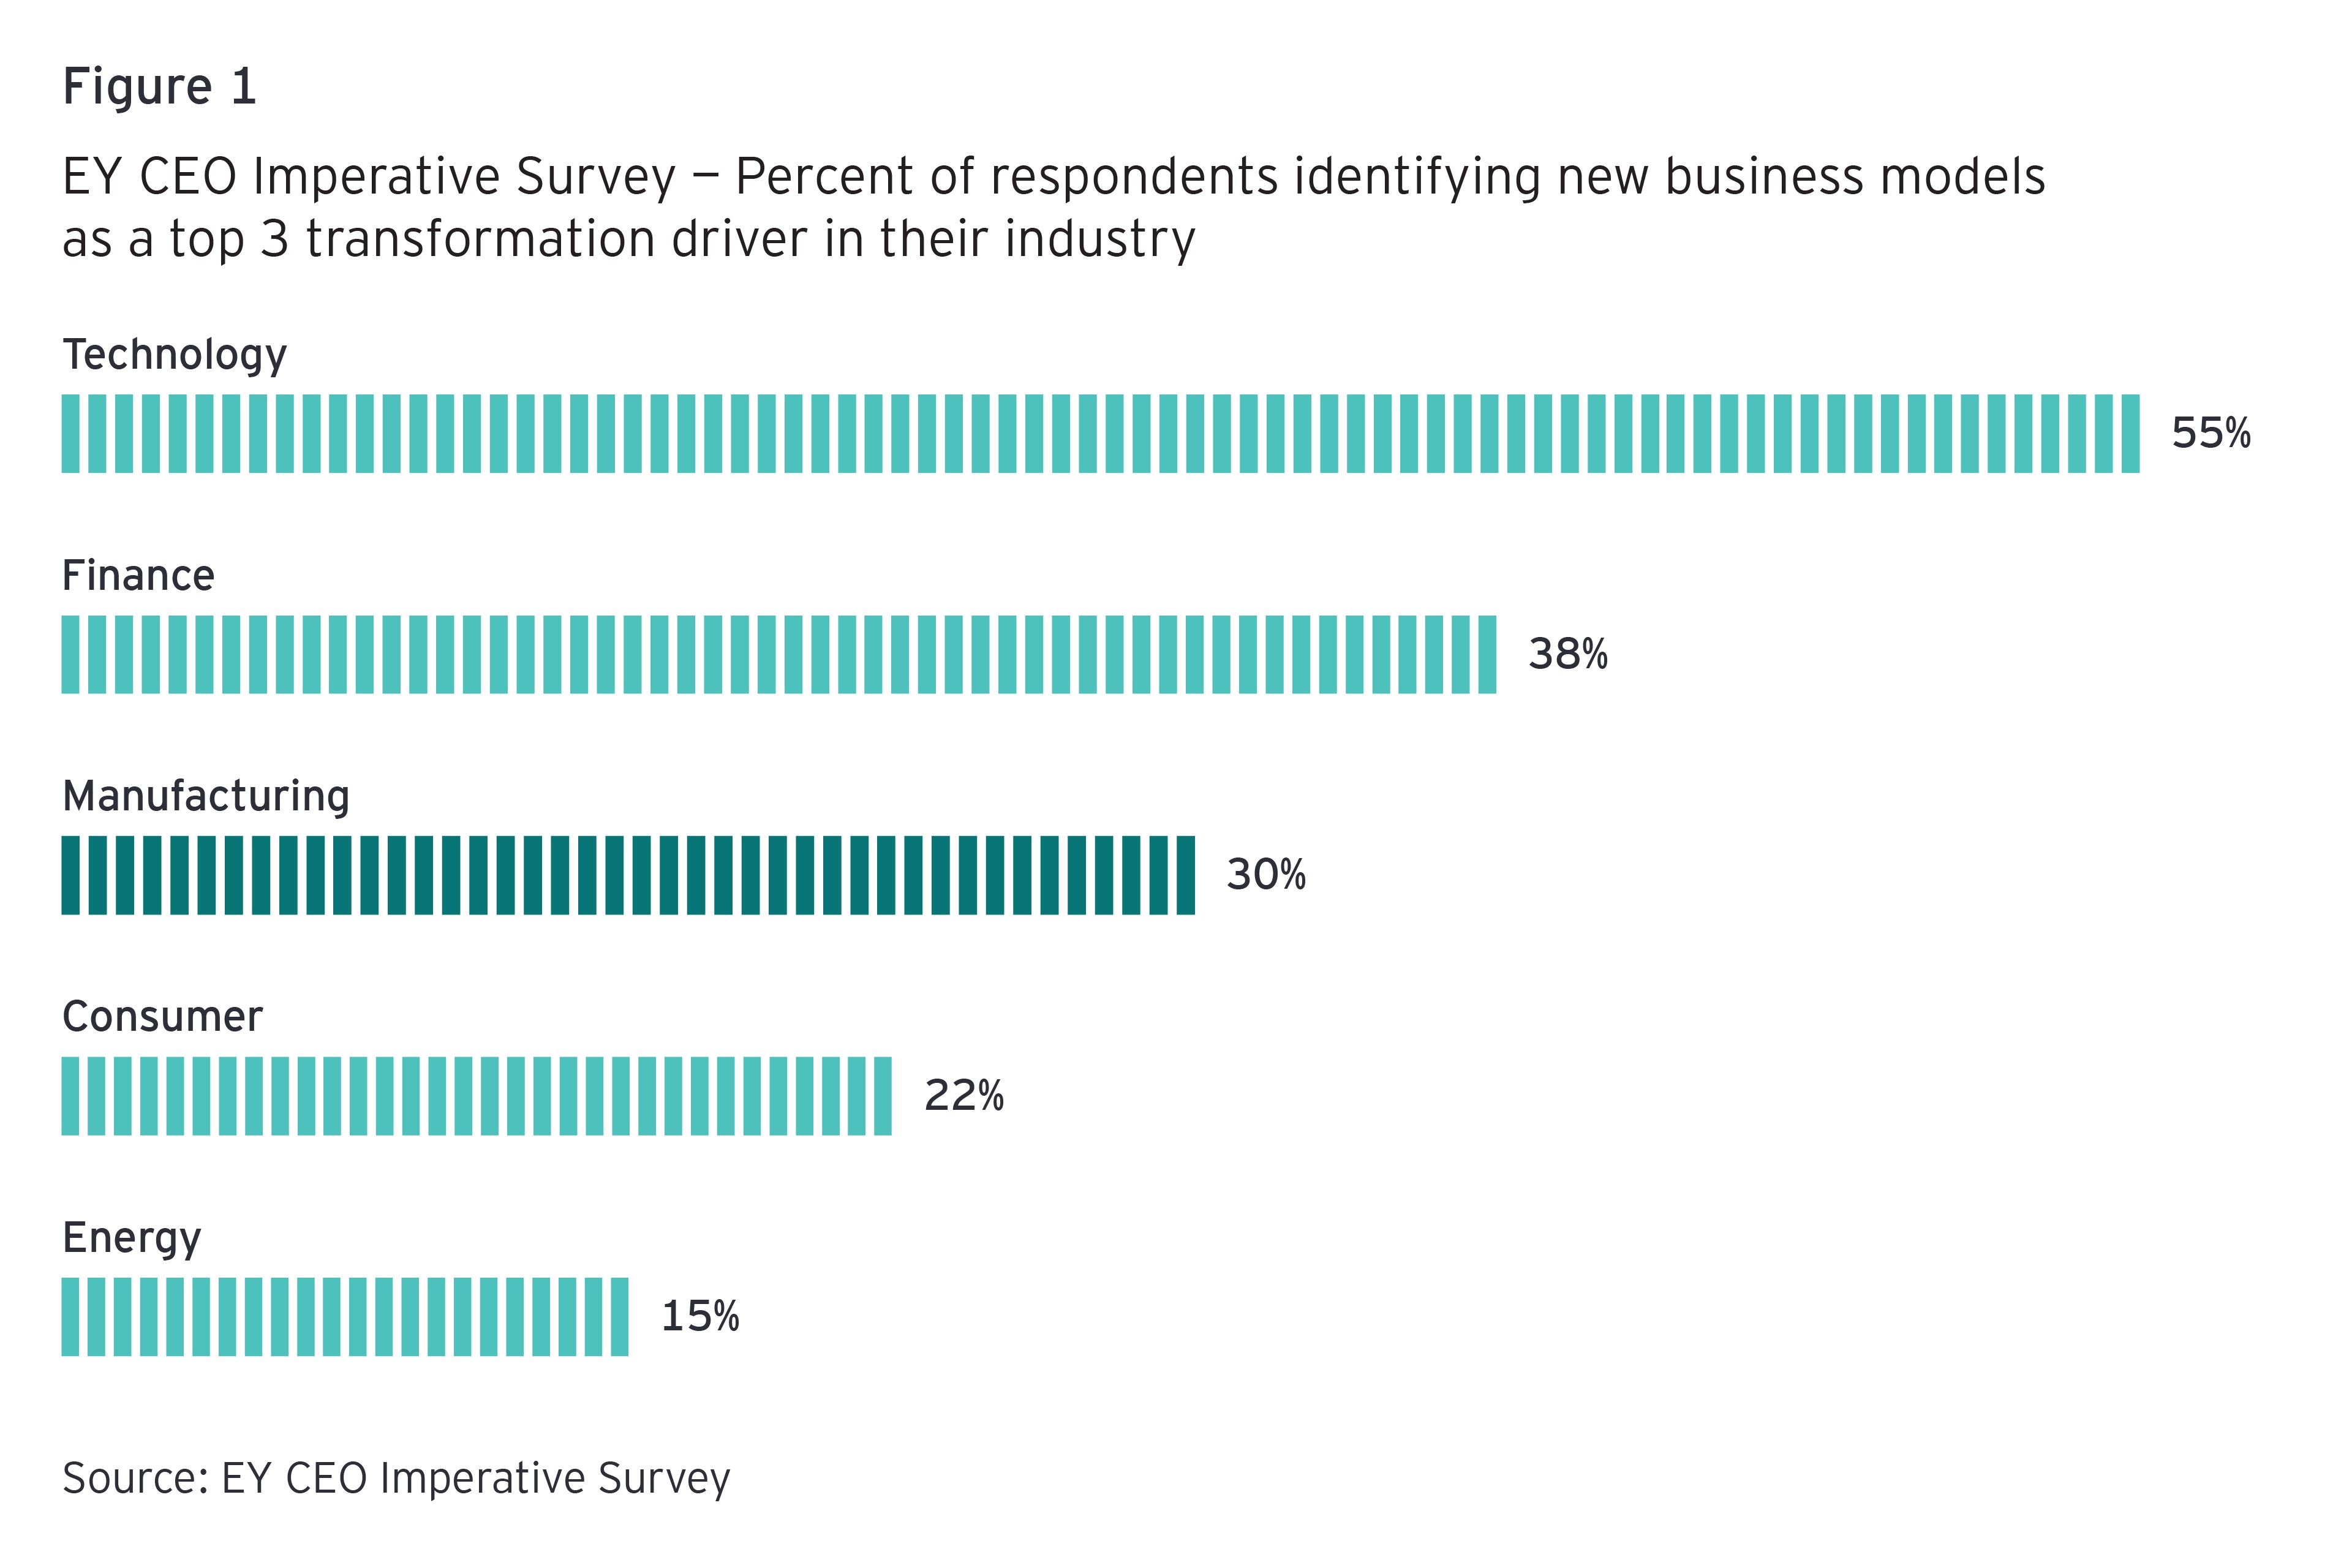 Percent of respondents identifying new business models as a top 3 transformation driver in their industry